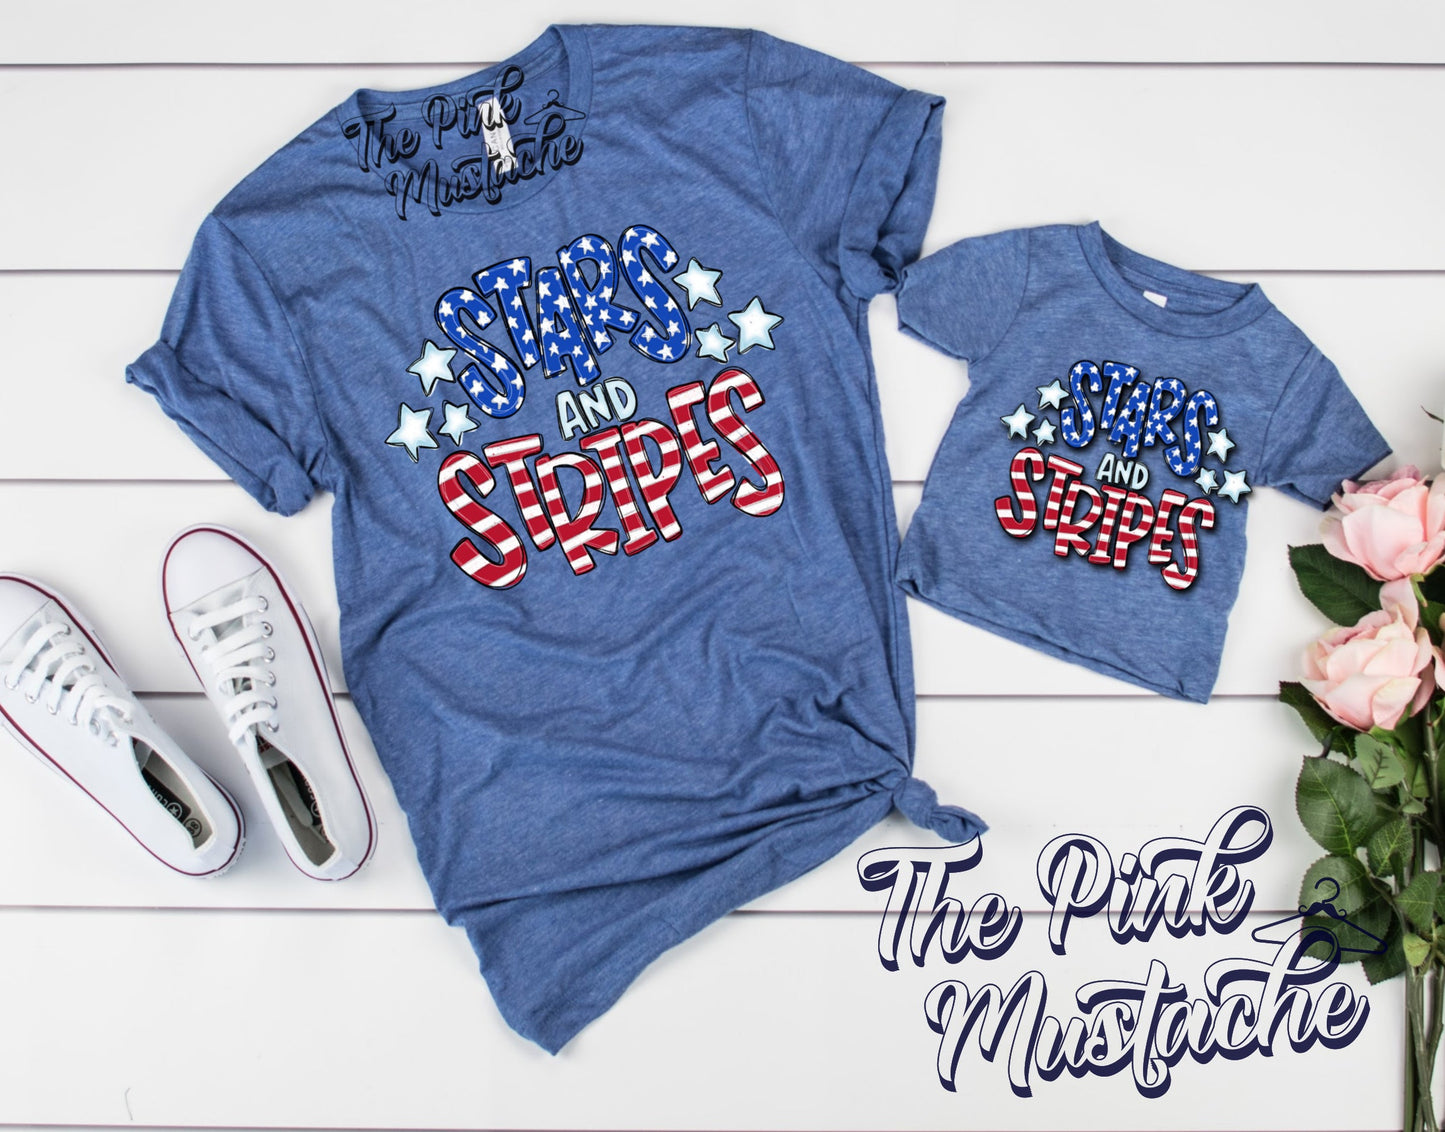 Stars and Stripes July 4th Matching Shirts / Memorial Day July 4th / Retro Style/ Toddler - Youth - Adult Sizing